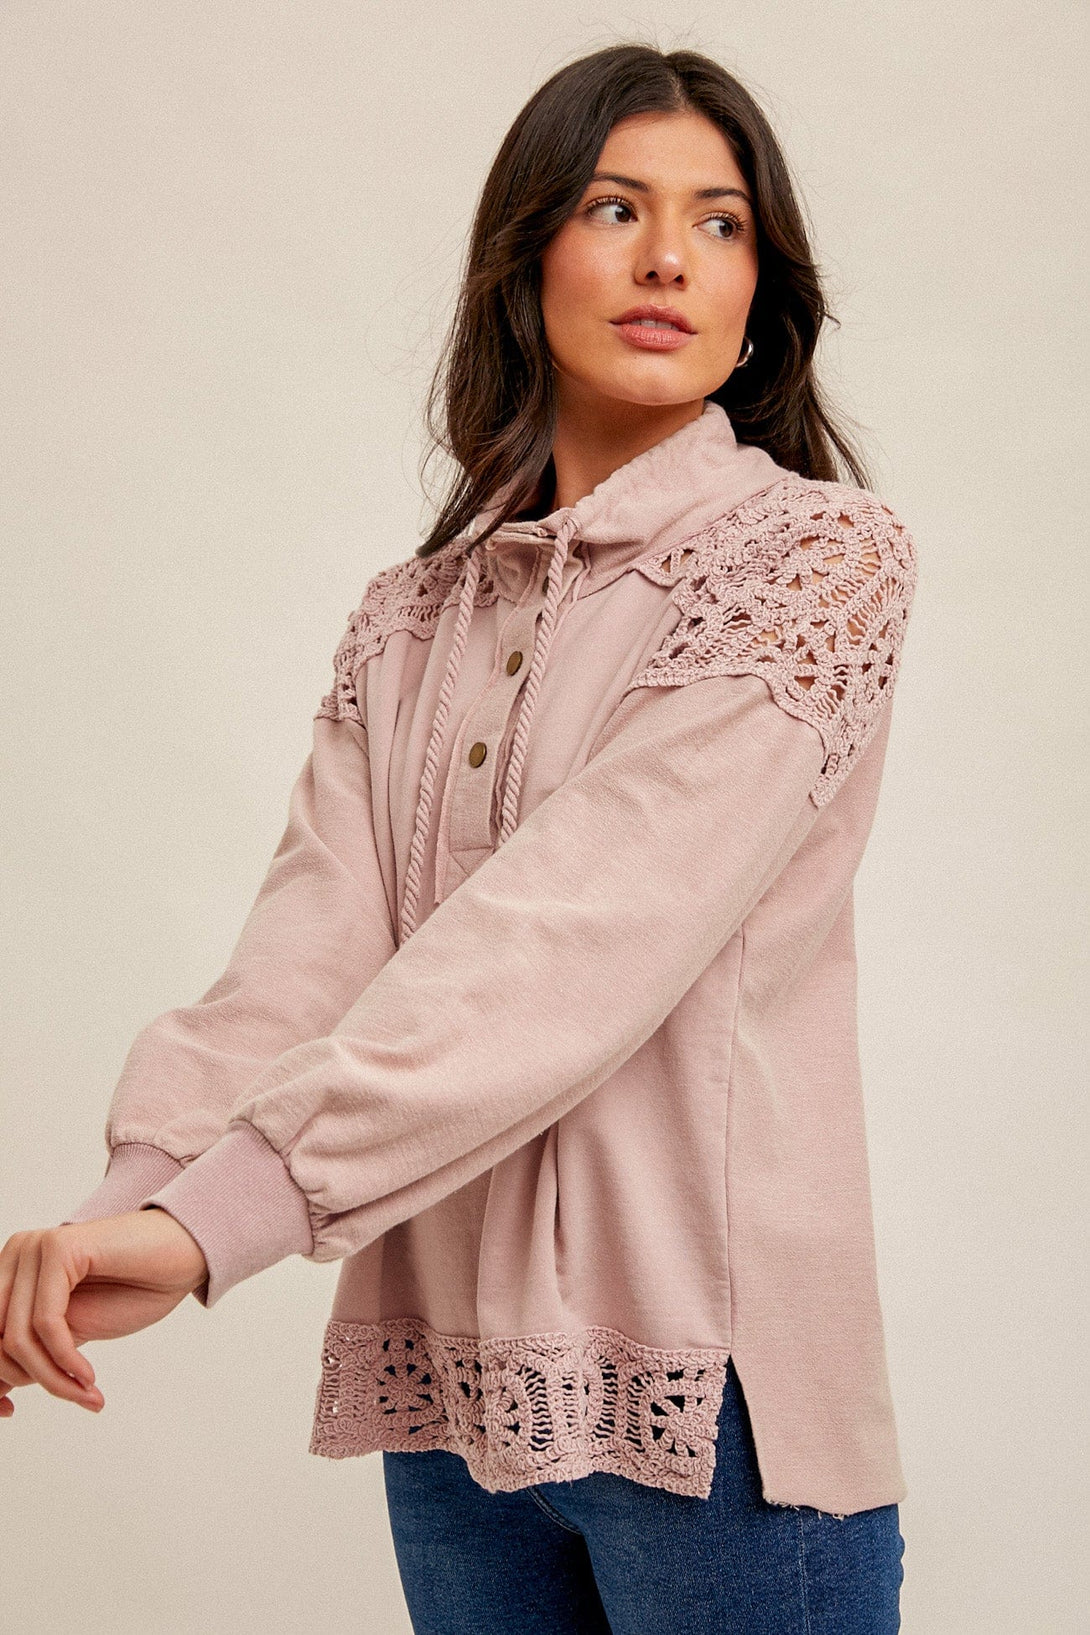 Hem & Thread Crochet Lace Contrast French Terry Pullover